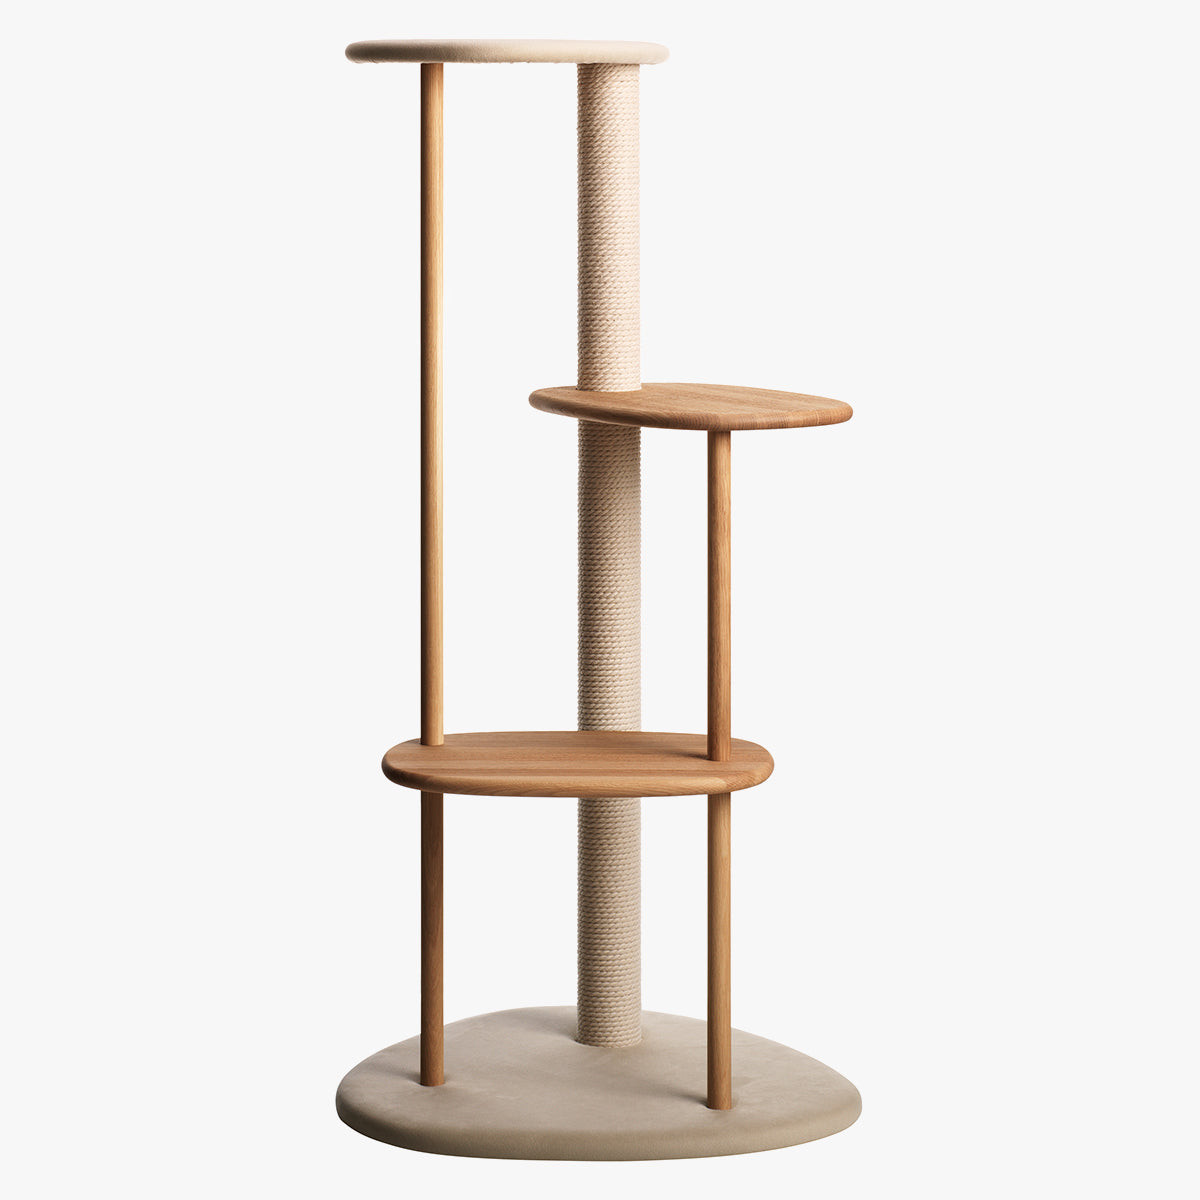 Karimoku Cat 124cm Tall Cat Tree, In Natural Wood | at Made Moggie